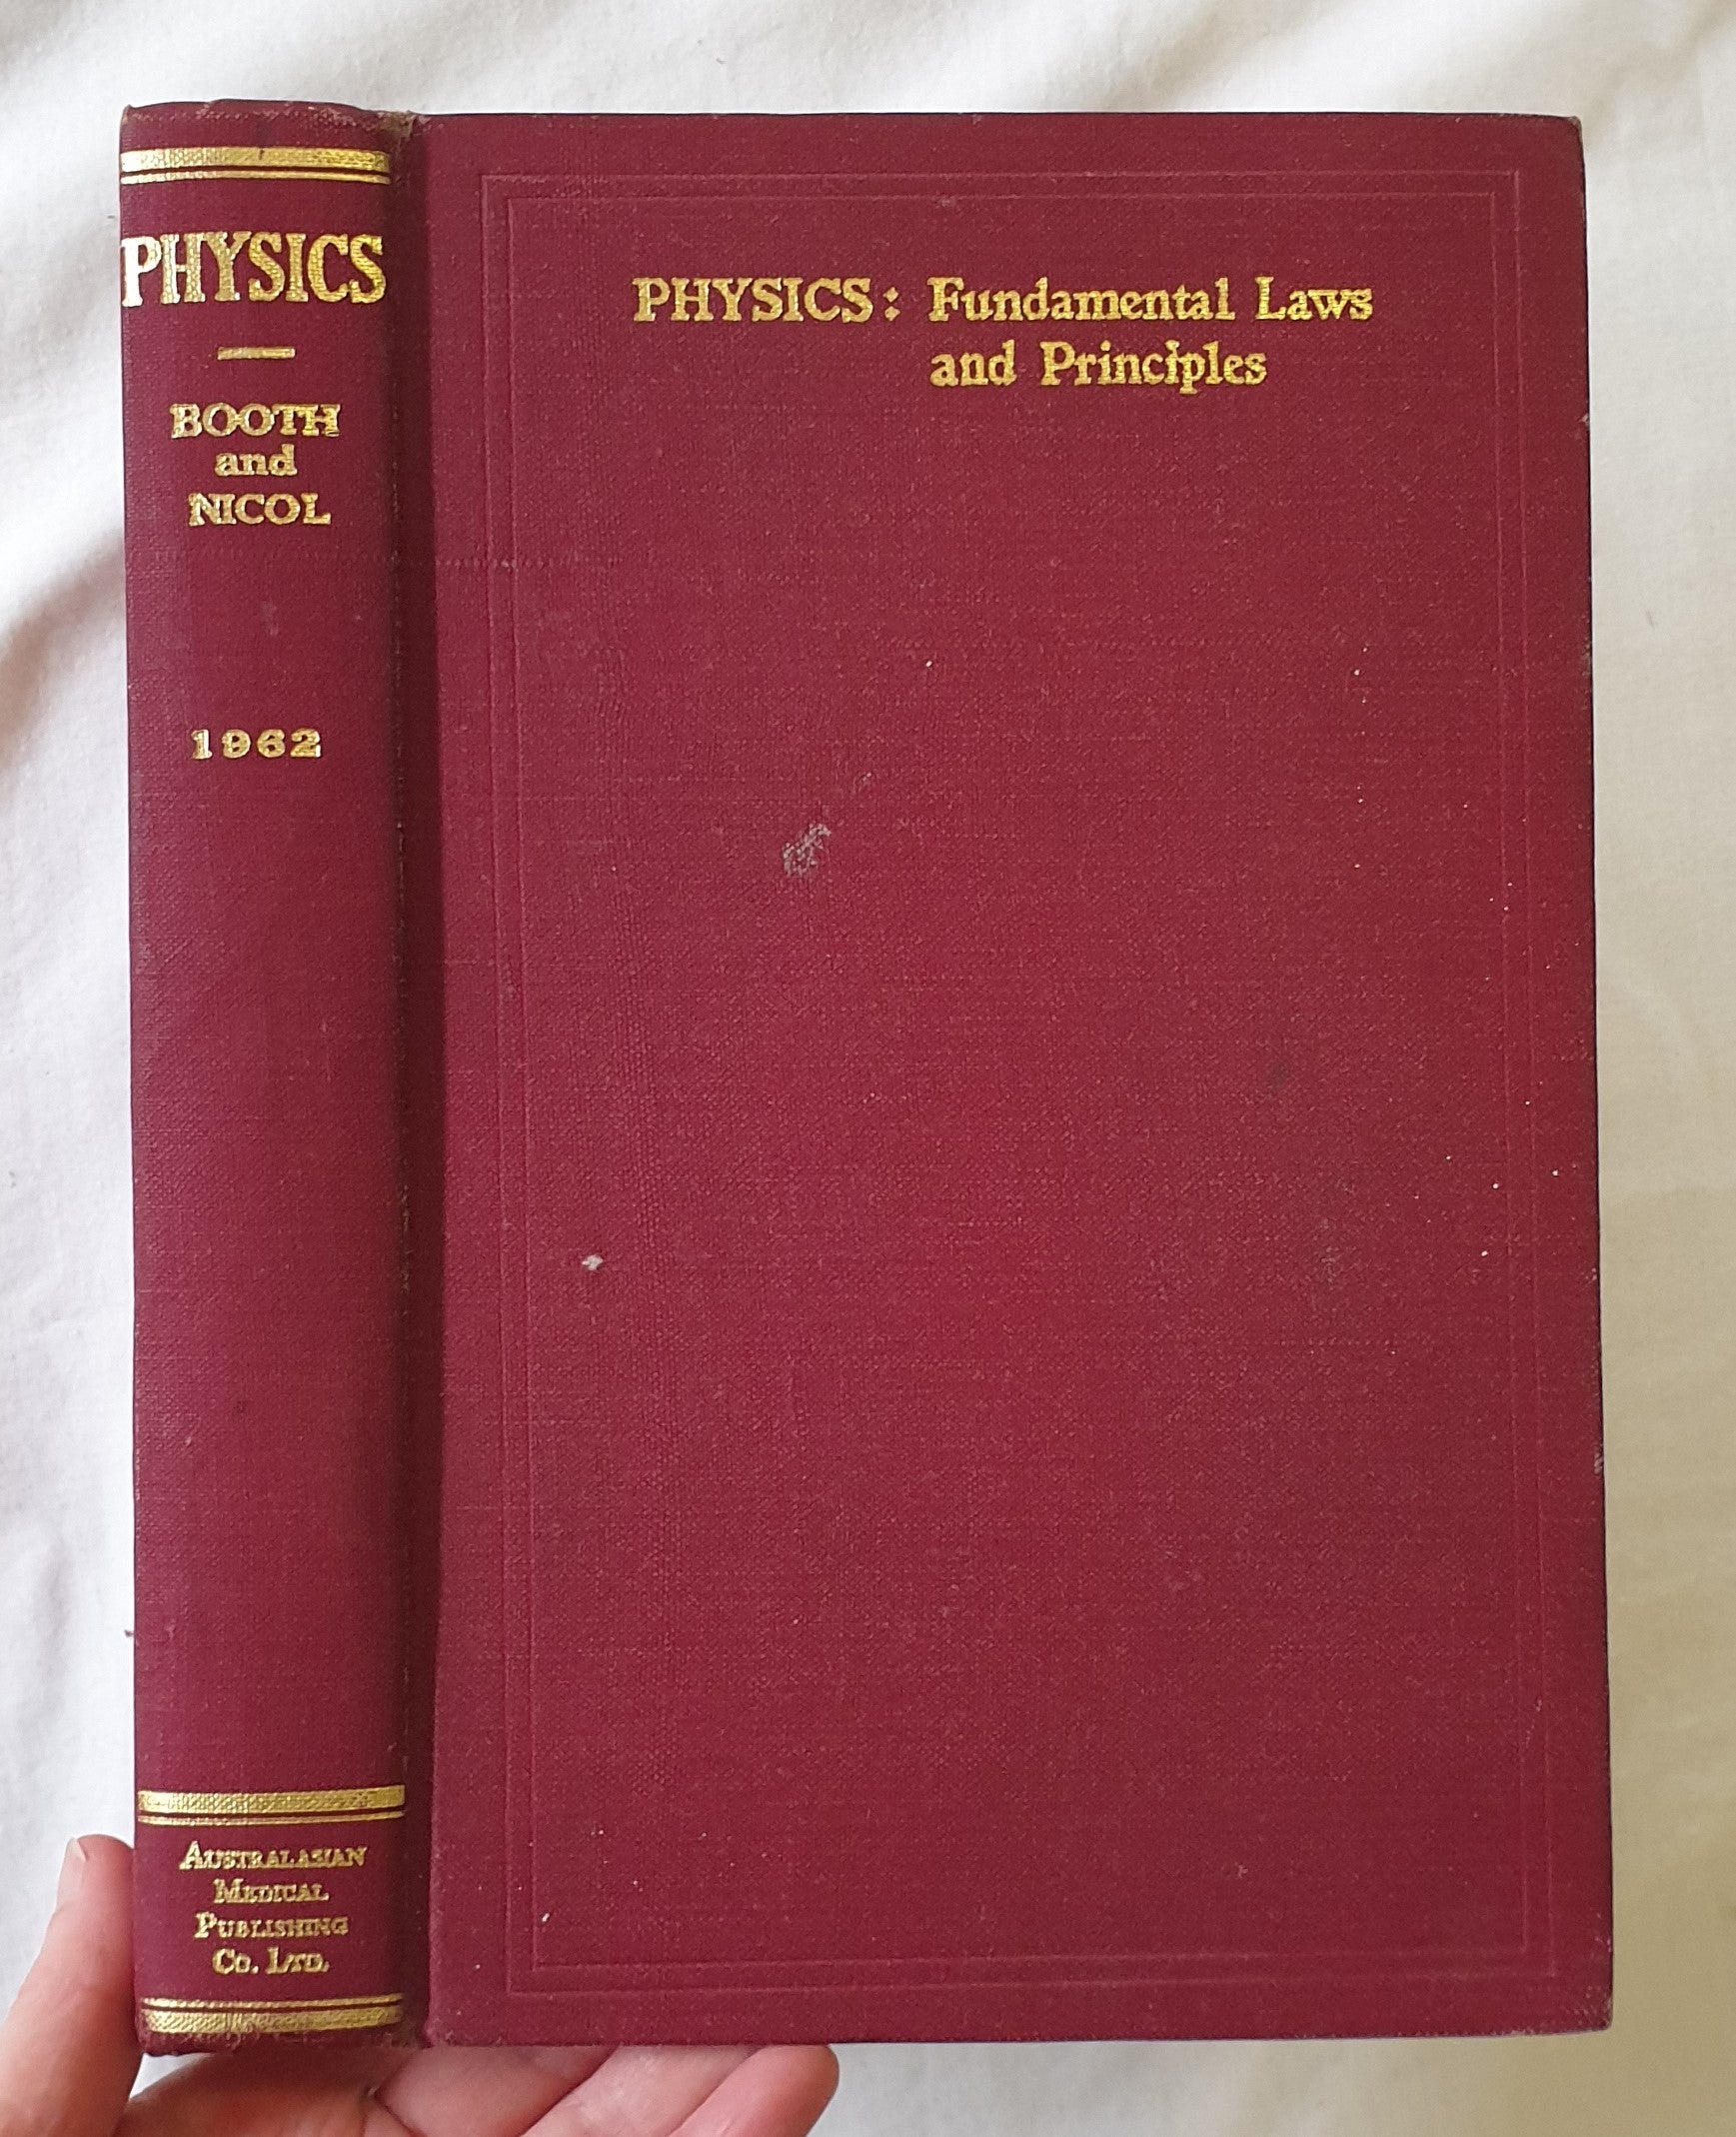 Physics  Fundamental Laws and Principles with Problems and Worked Solutions  by Edgar H. Booth and Phyllis M. Nicol